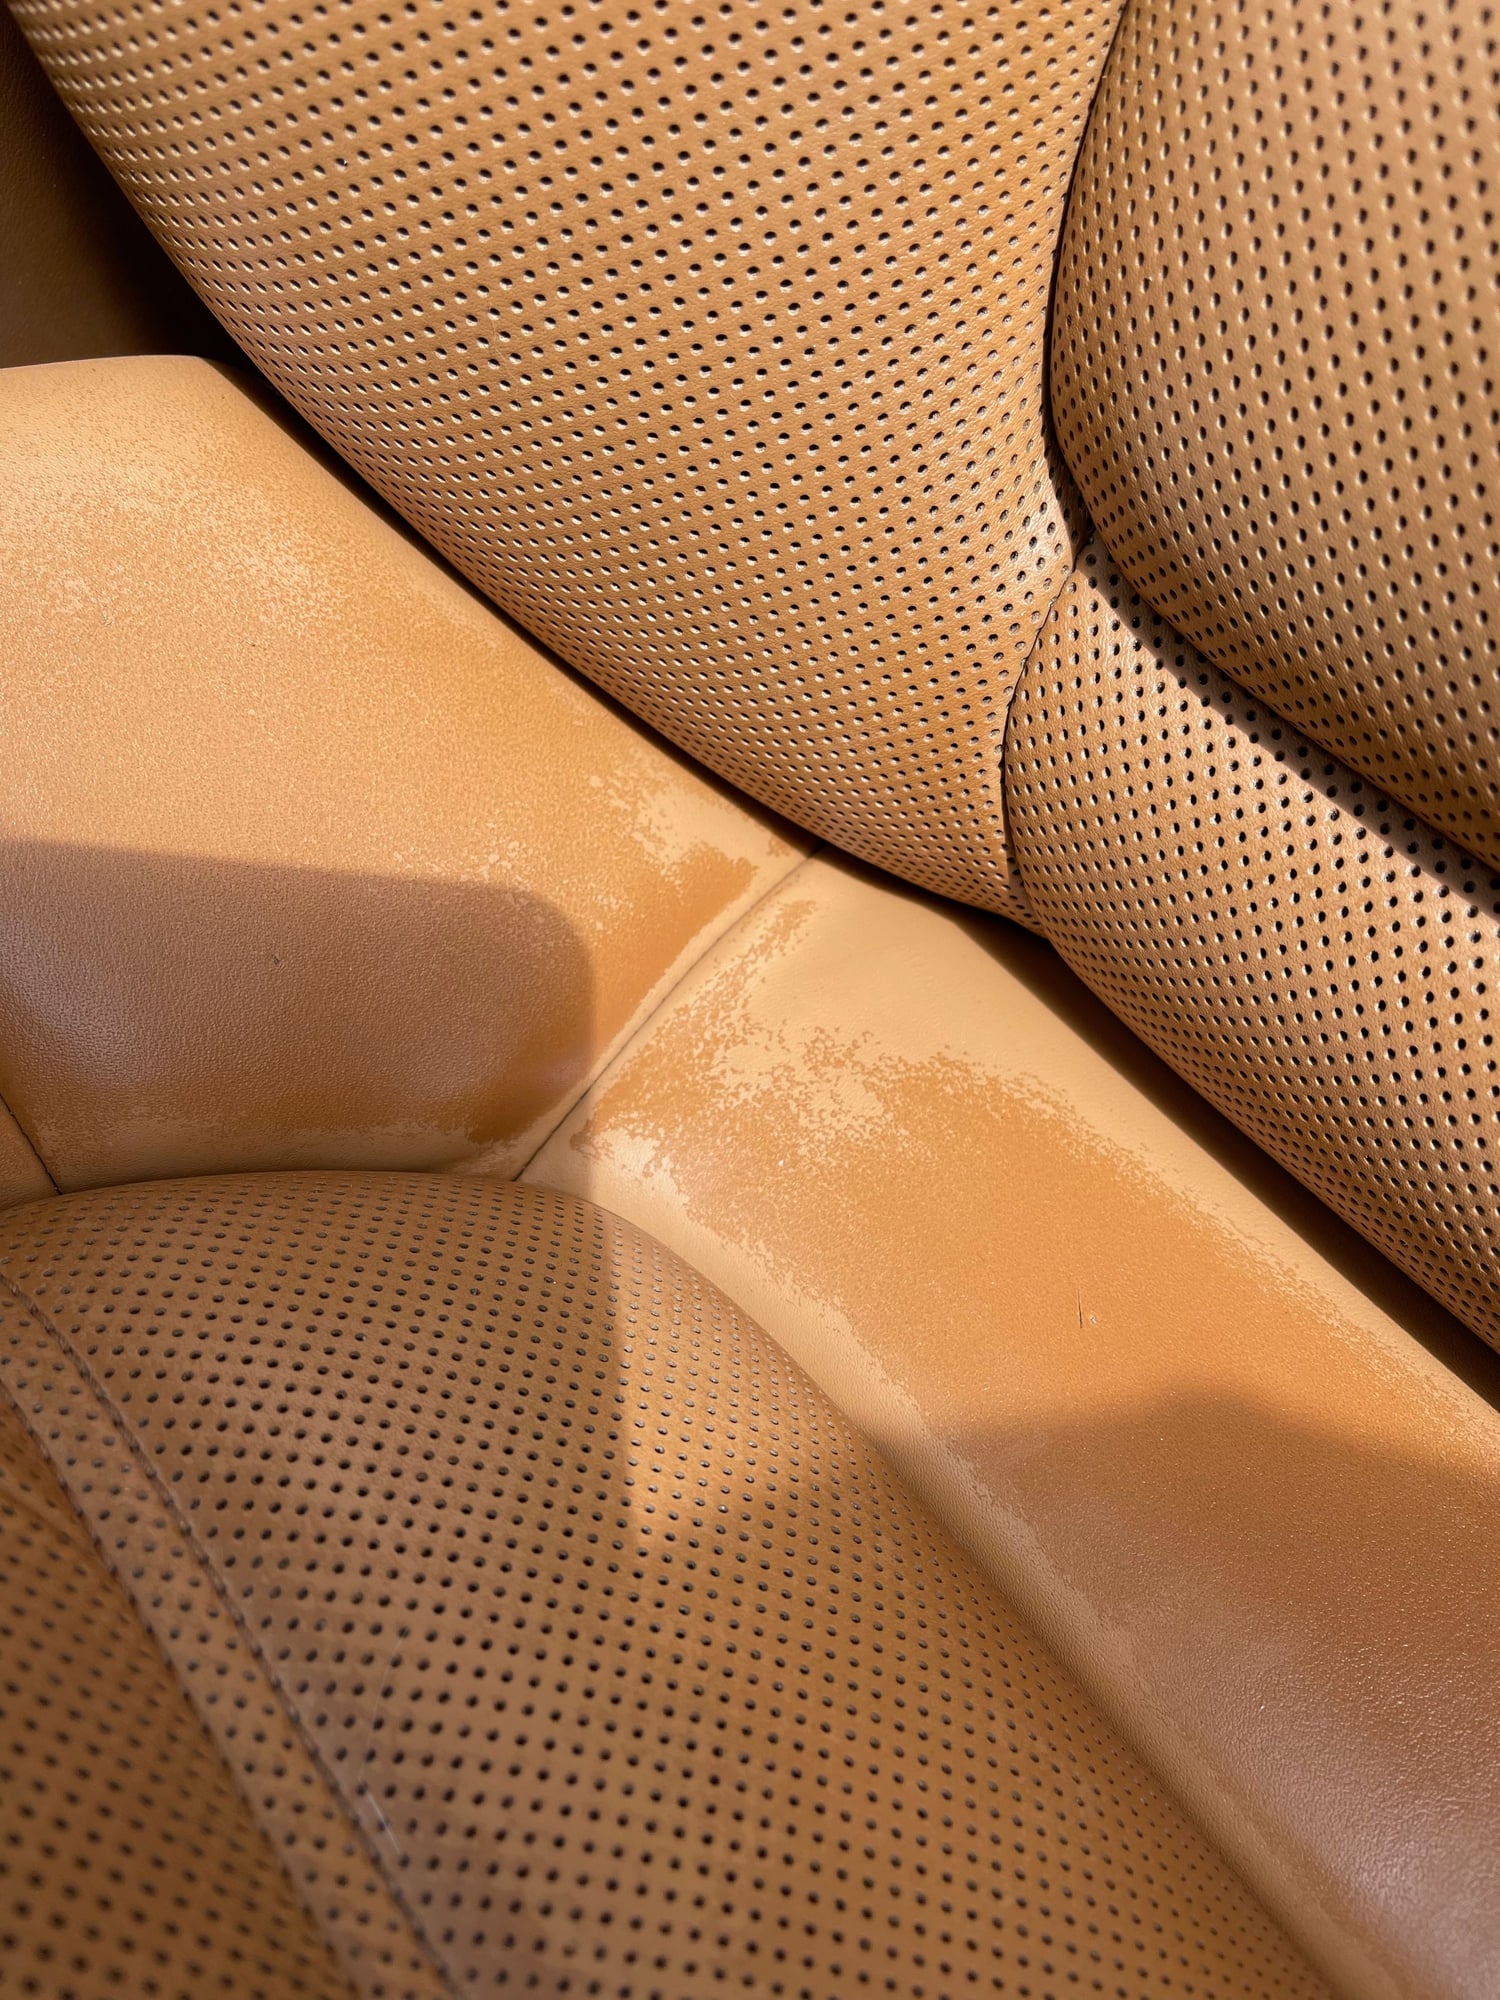 Leather Touch Up, Great Solution - Rennlist - Porsche Discussion Forums